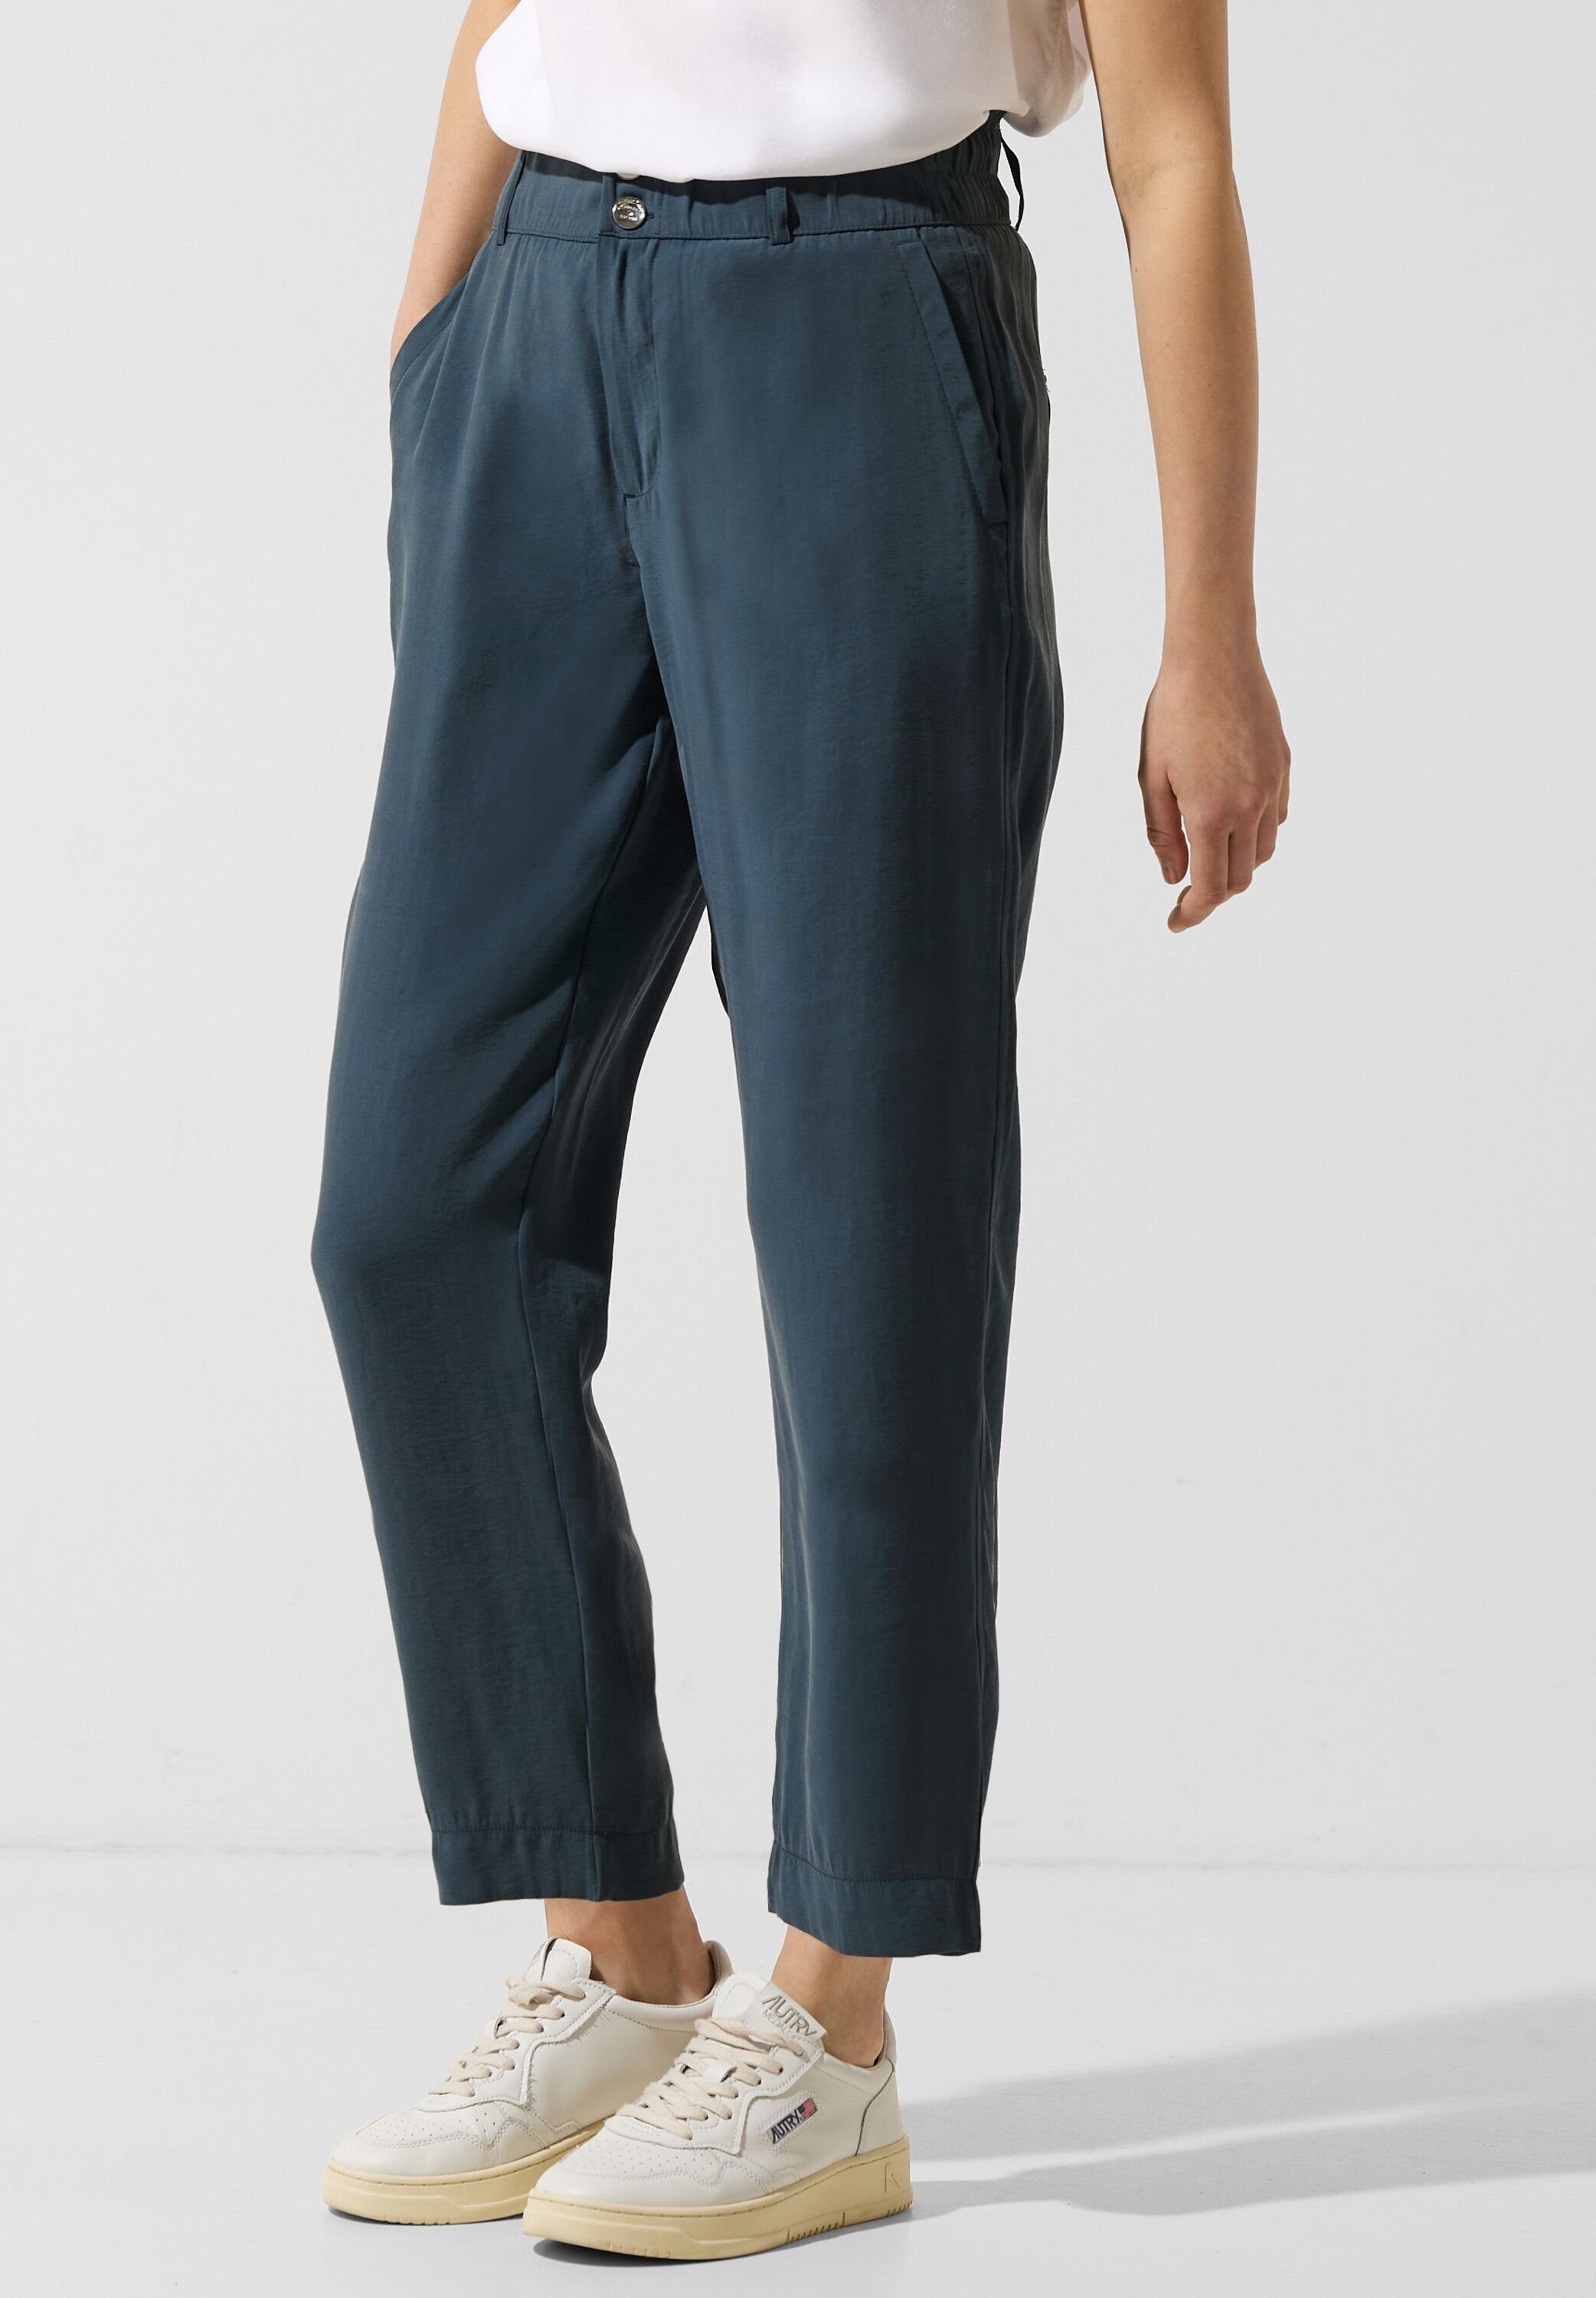 STREET ONE Jogger Pants Materialmix, Fit Damenhose softer Loose